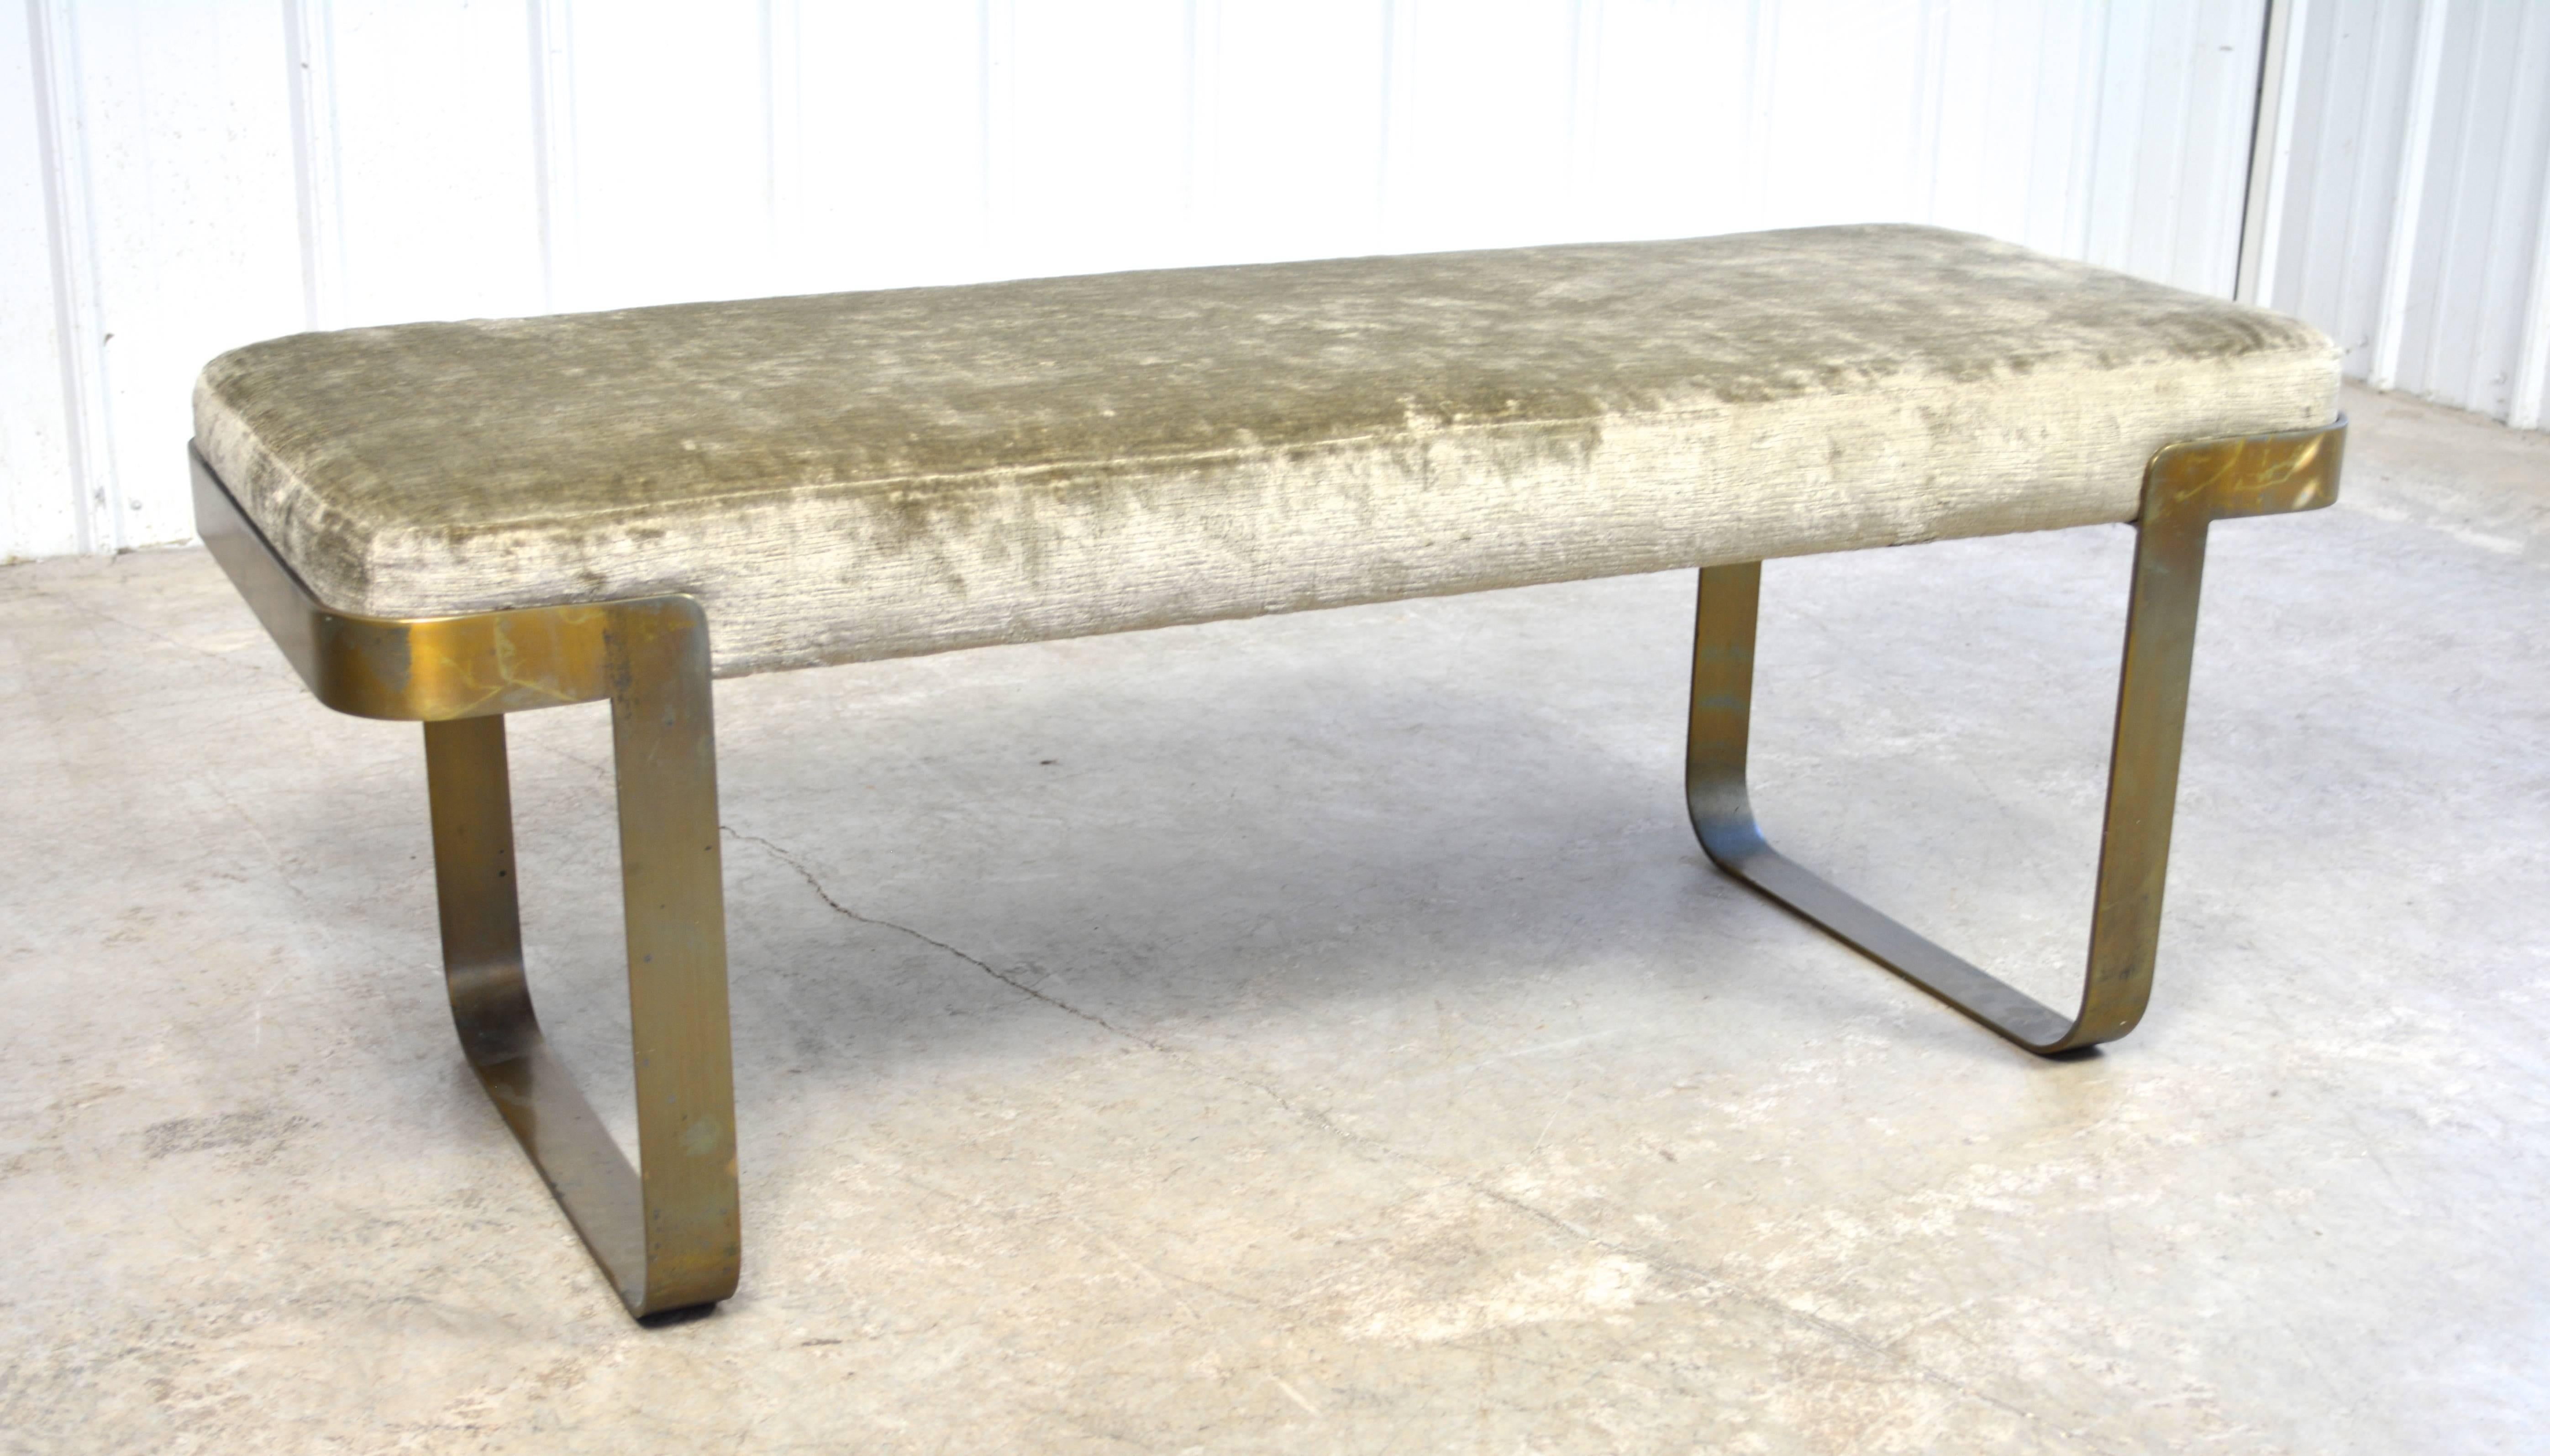 Heavy brass frame bench by Pace. Upholstered in mohair. Brass shows a nicely aged patina.